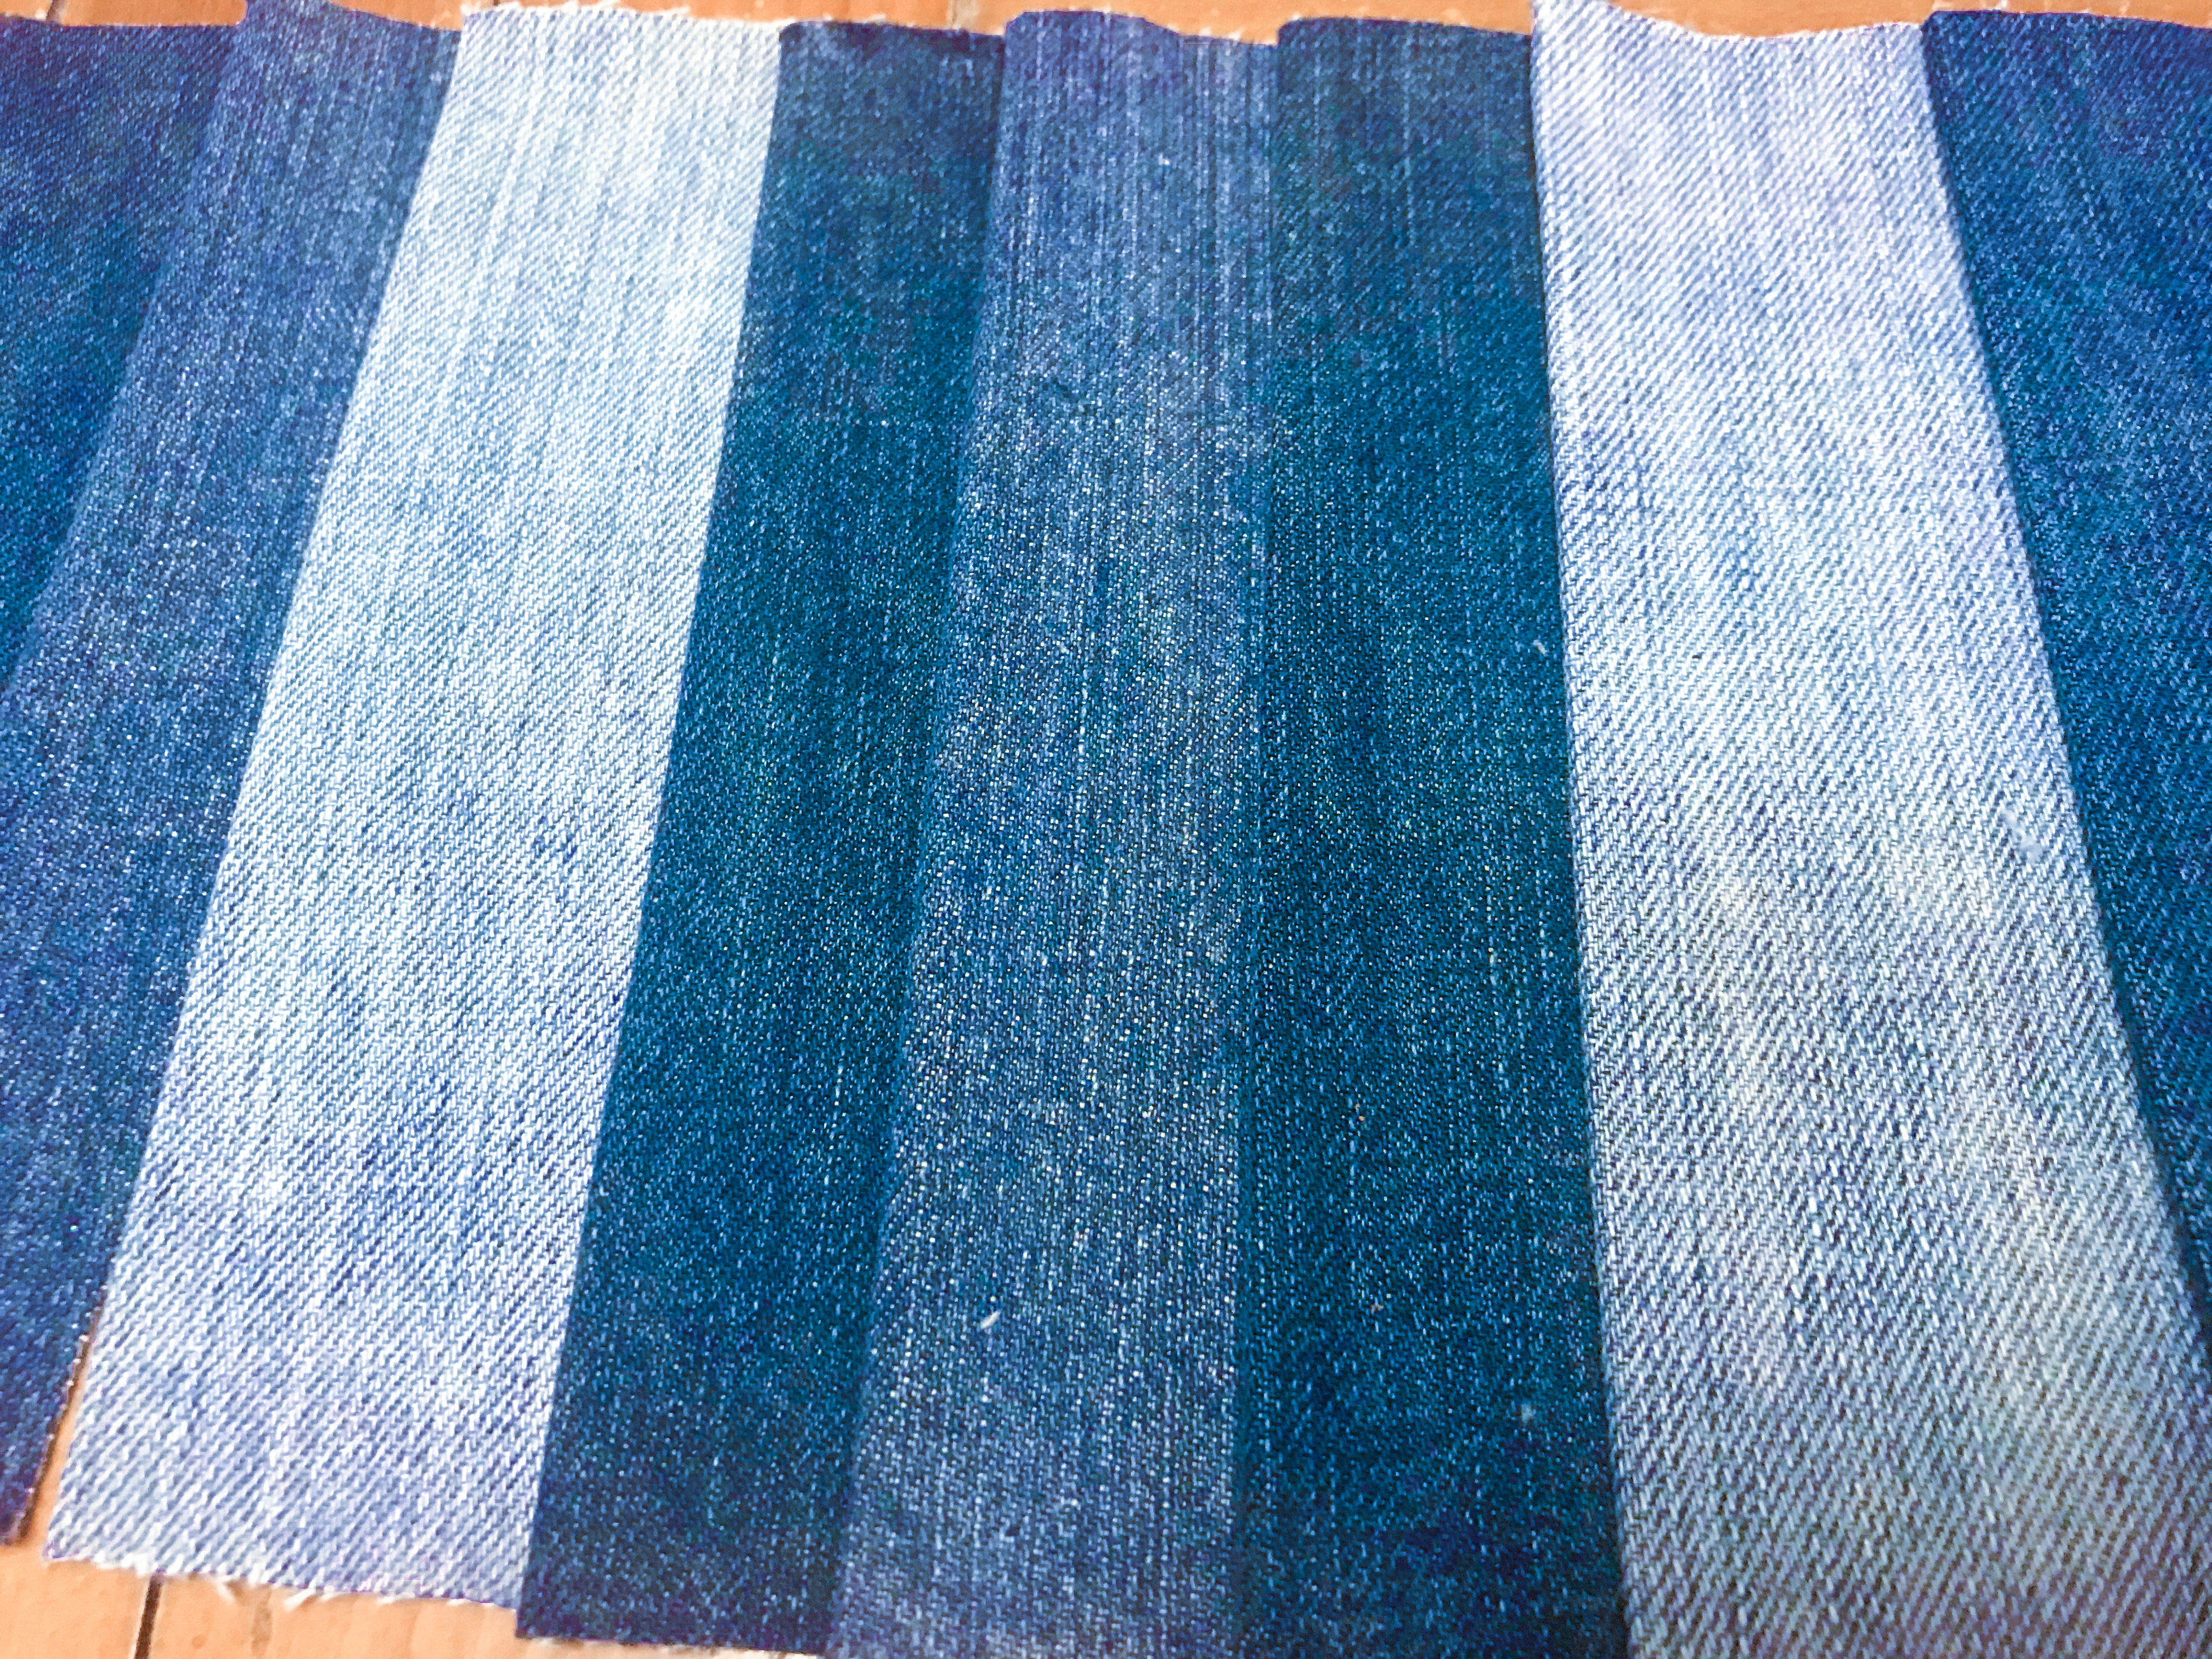 Jean strips of varying shades side by side.